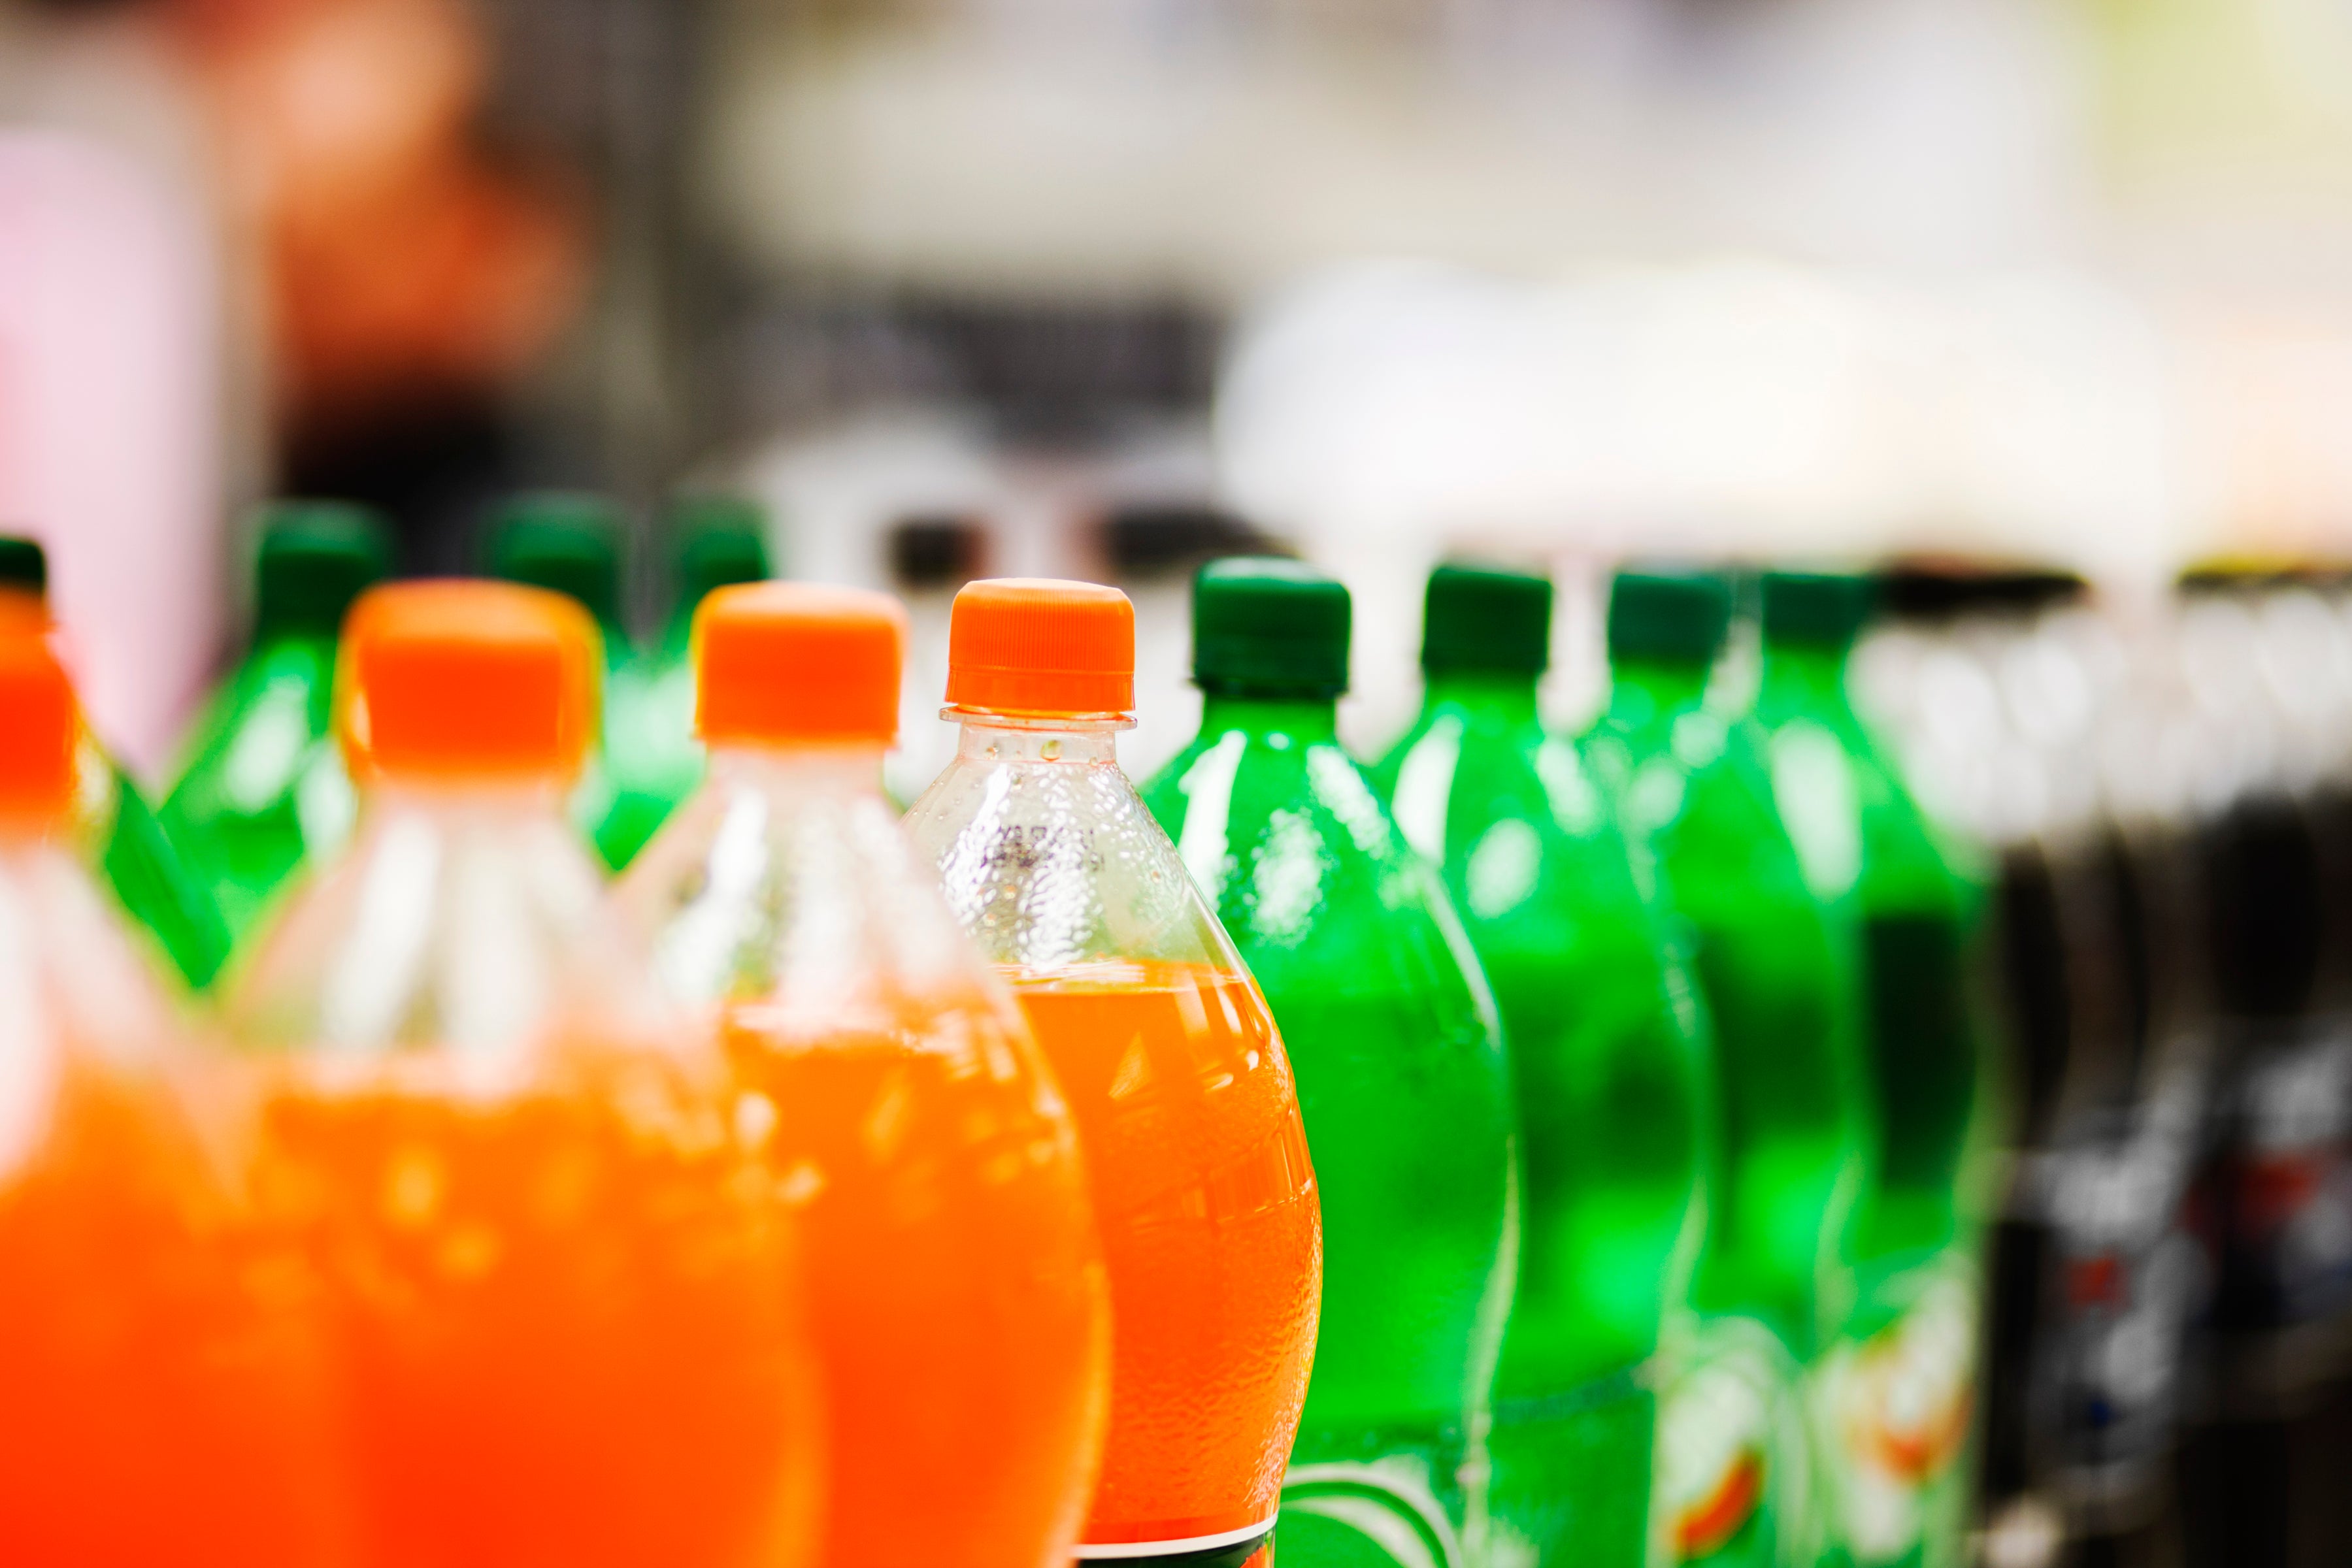 Children in the US consume more than the recommended levels of sugary drinks